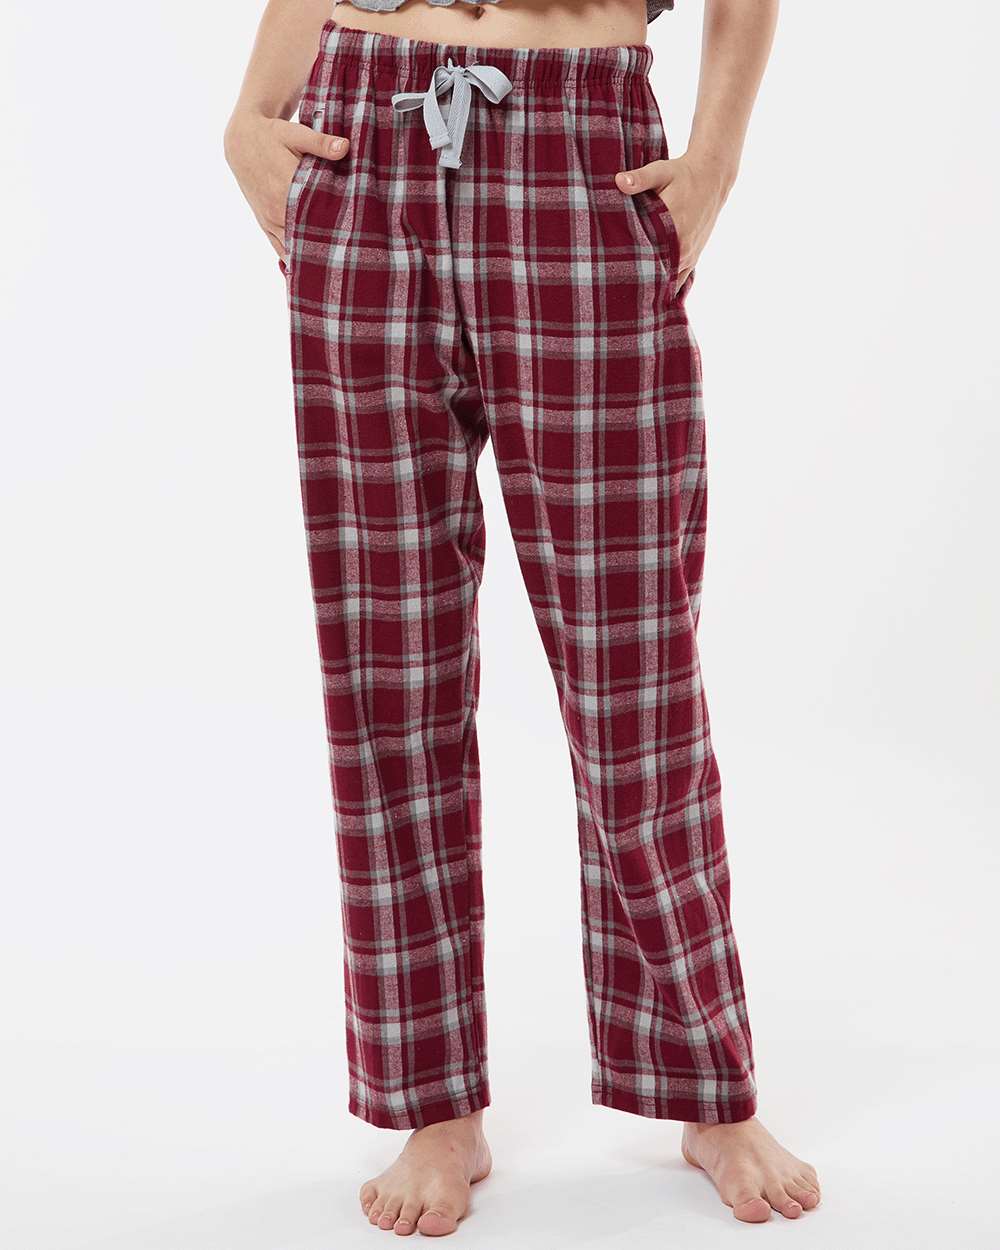 click to view Heritage Maroon Plaid